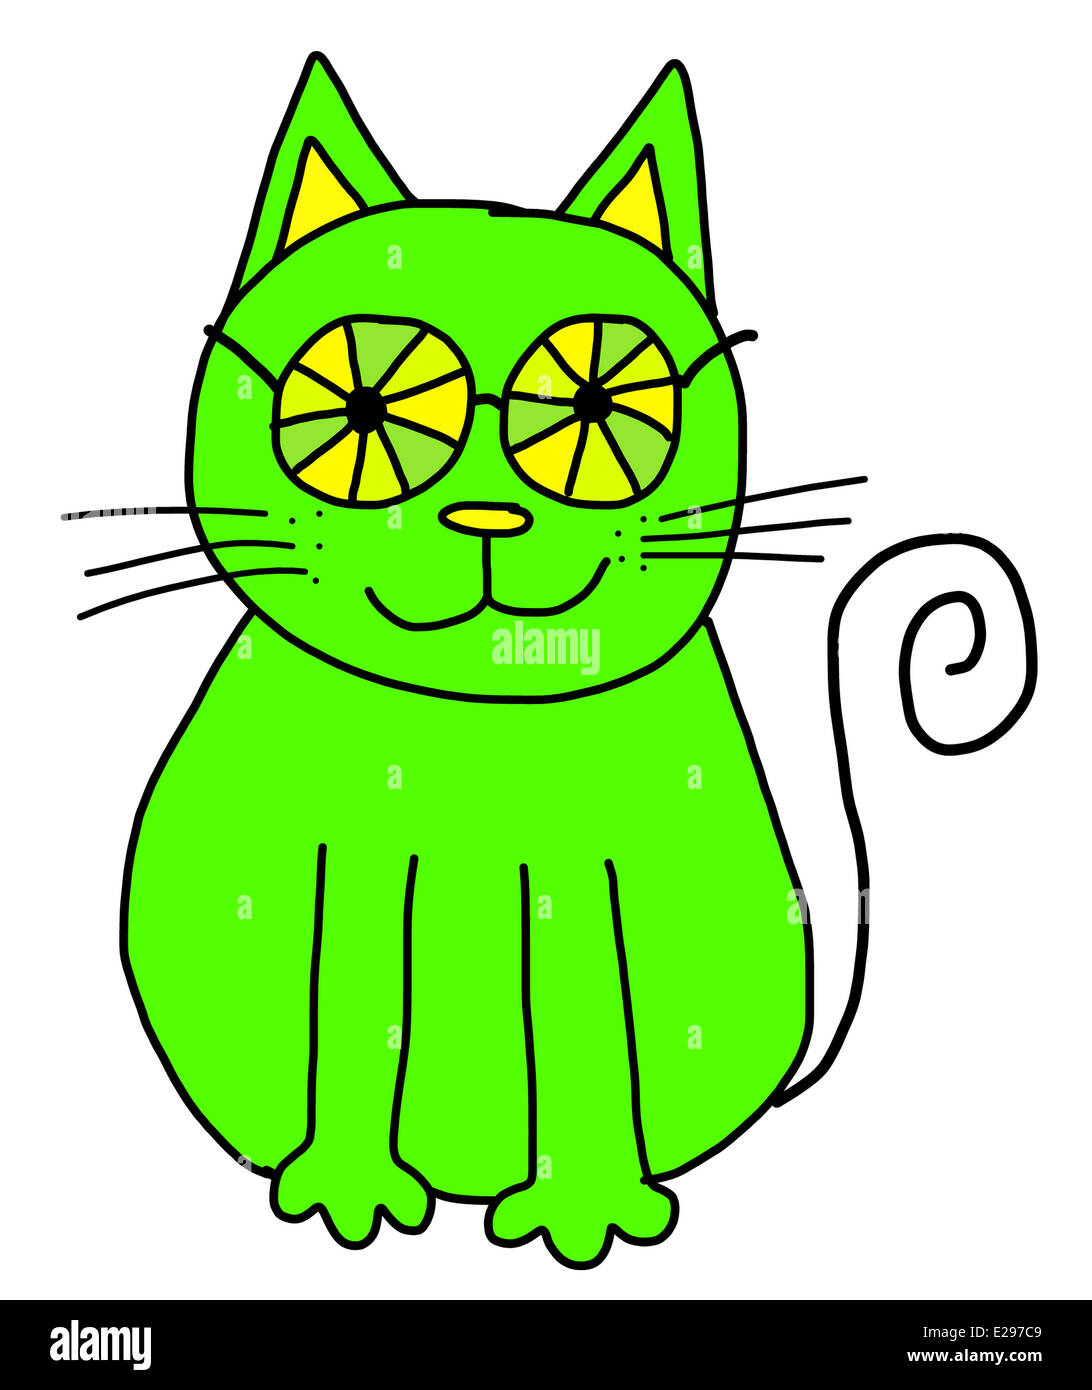 Illustration of a green cat wearing sunglasses Stock Photo